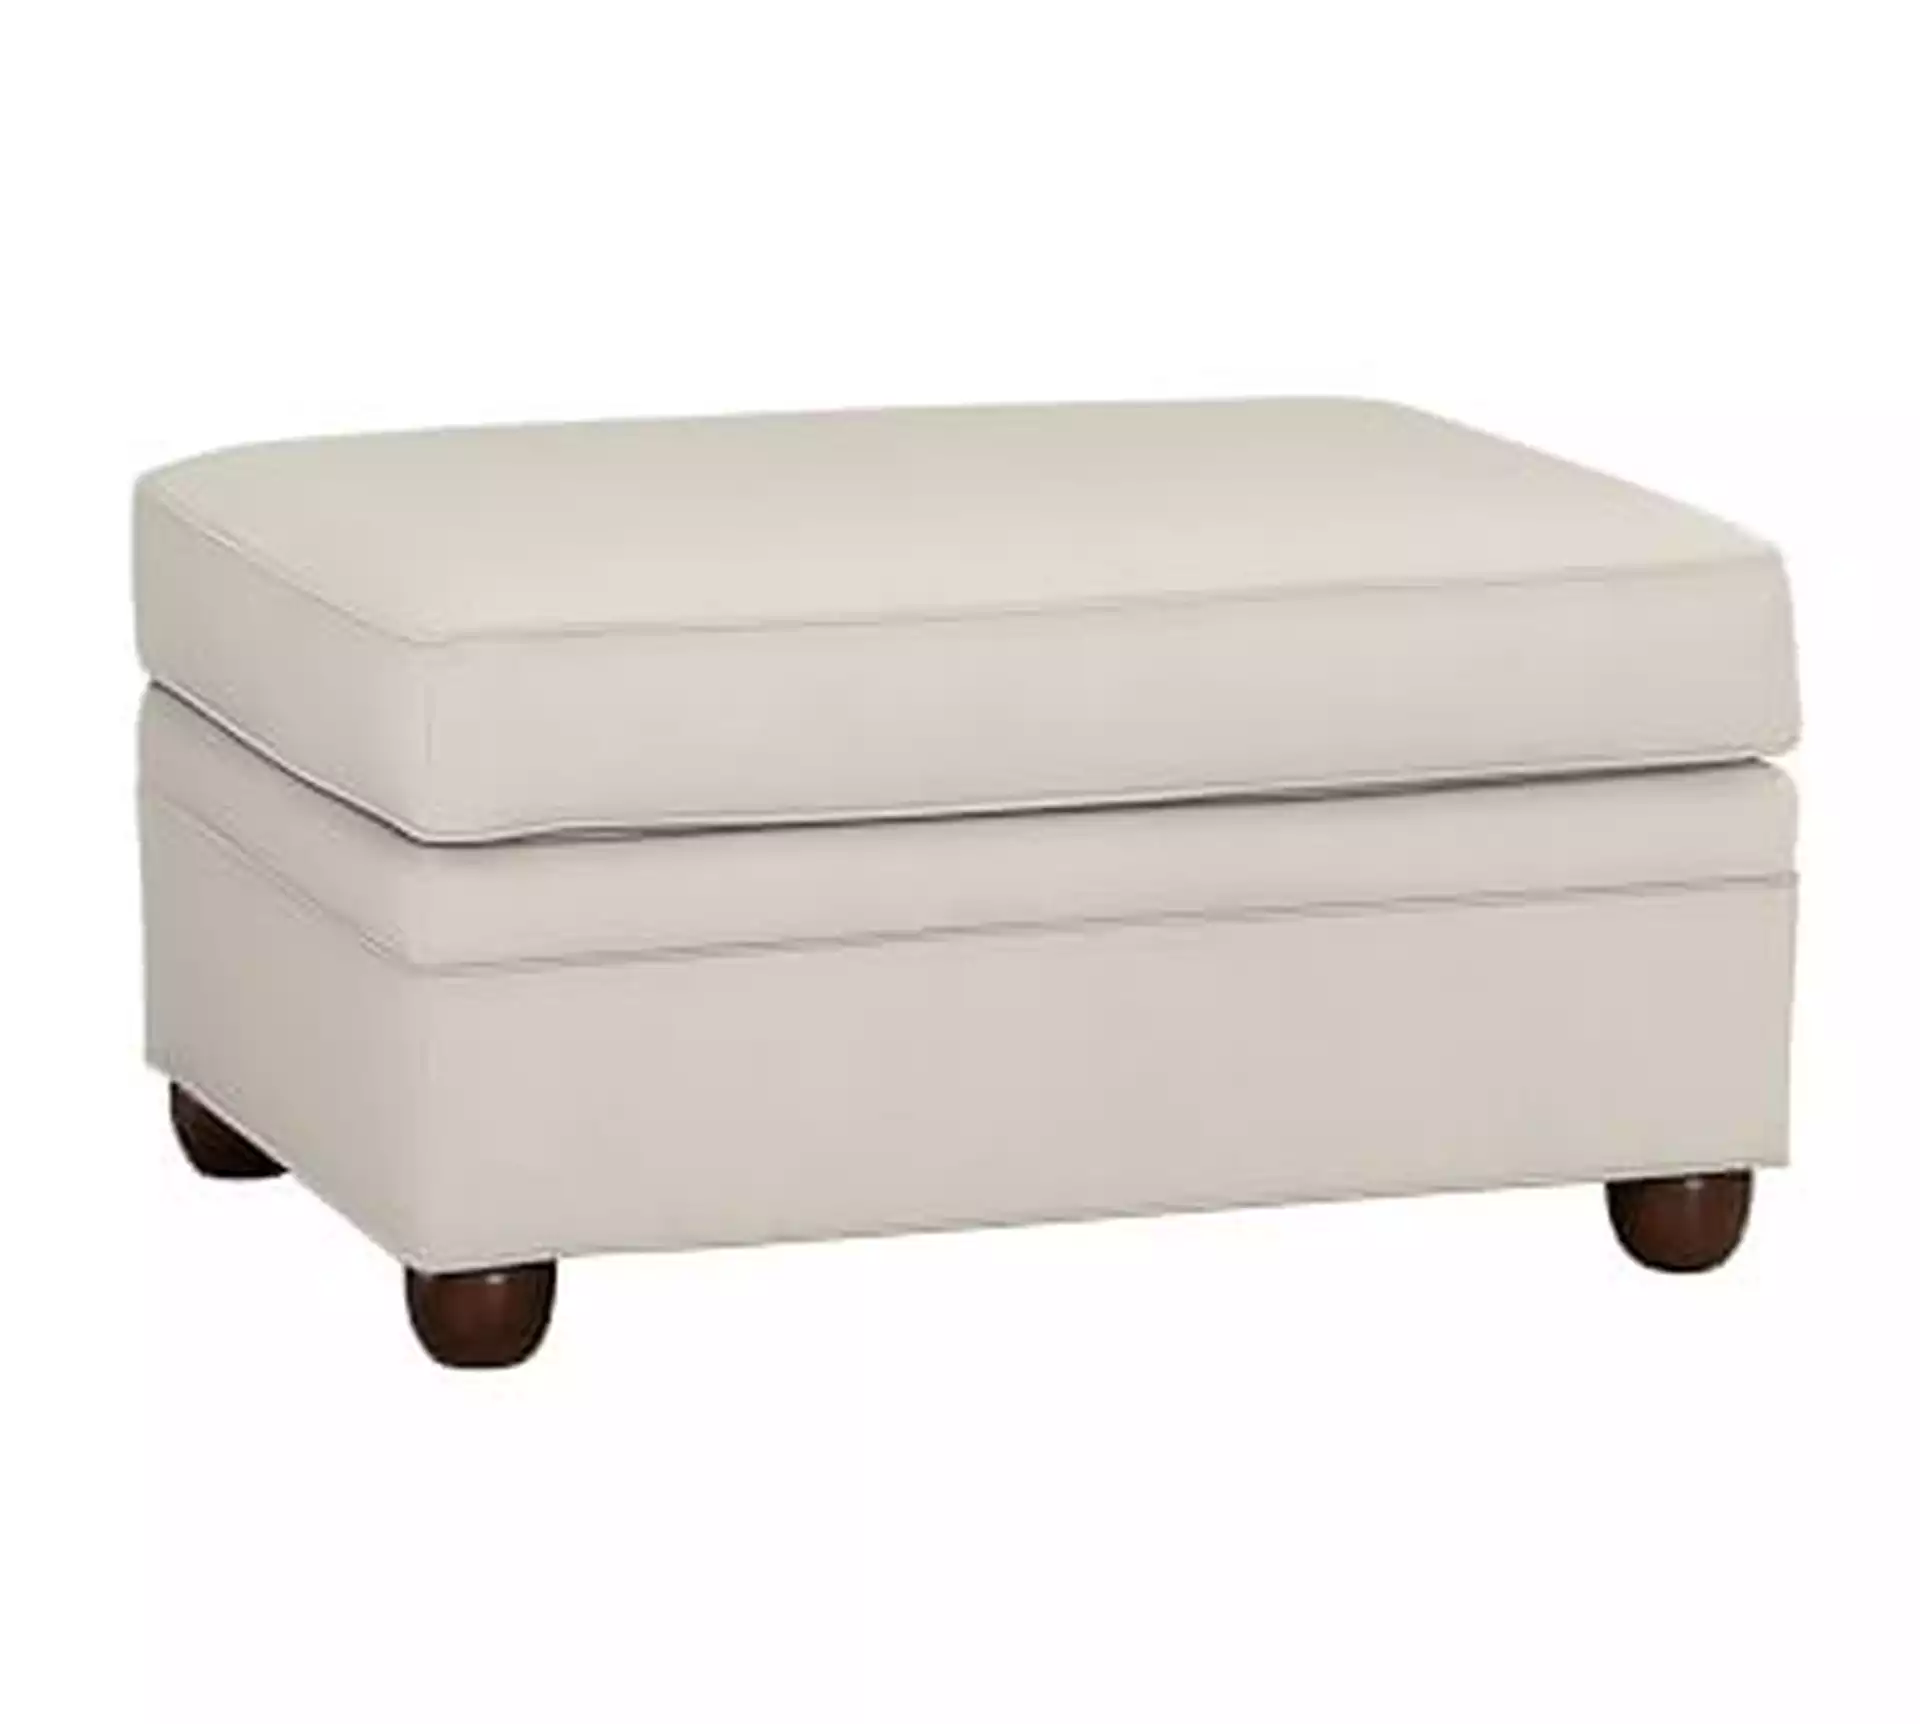 Chesterfield Roll Arm Upholstered Ottoman, Polyester Wrapped Cushions, Performance Heathered Basketweave Alabaster White